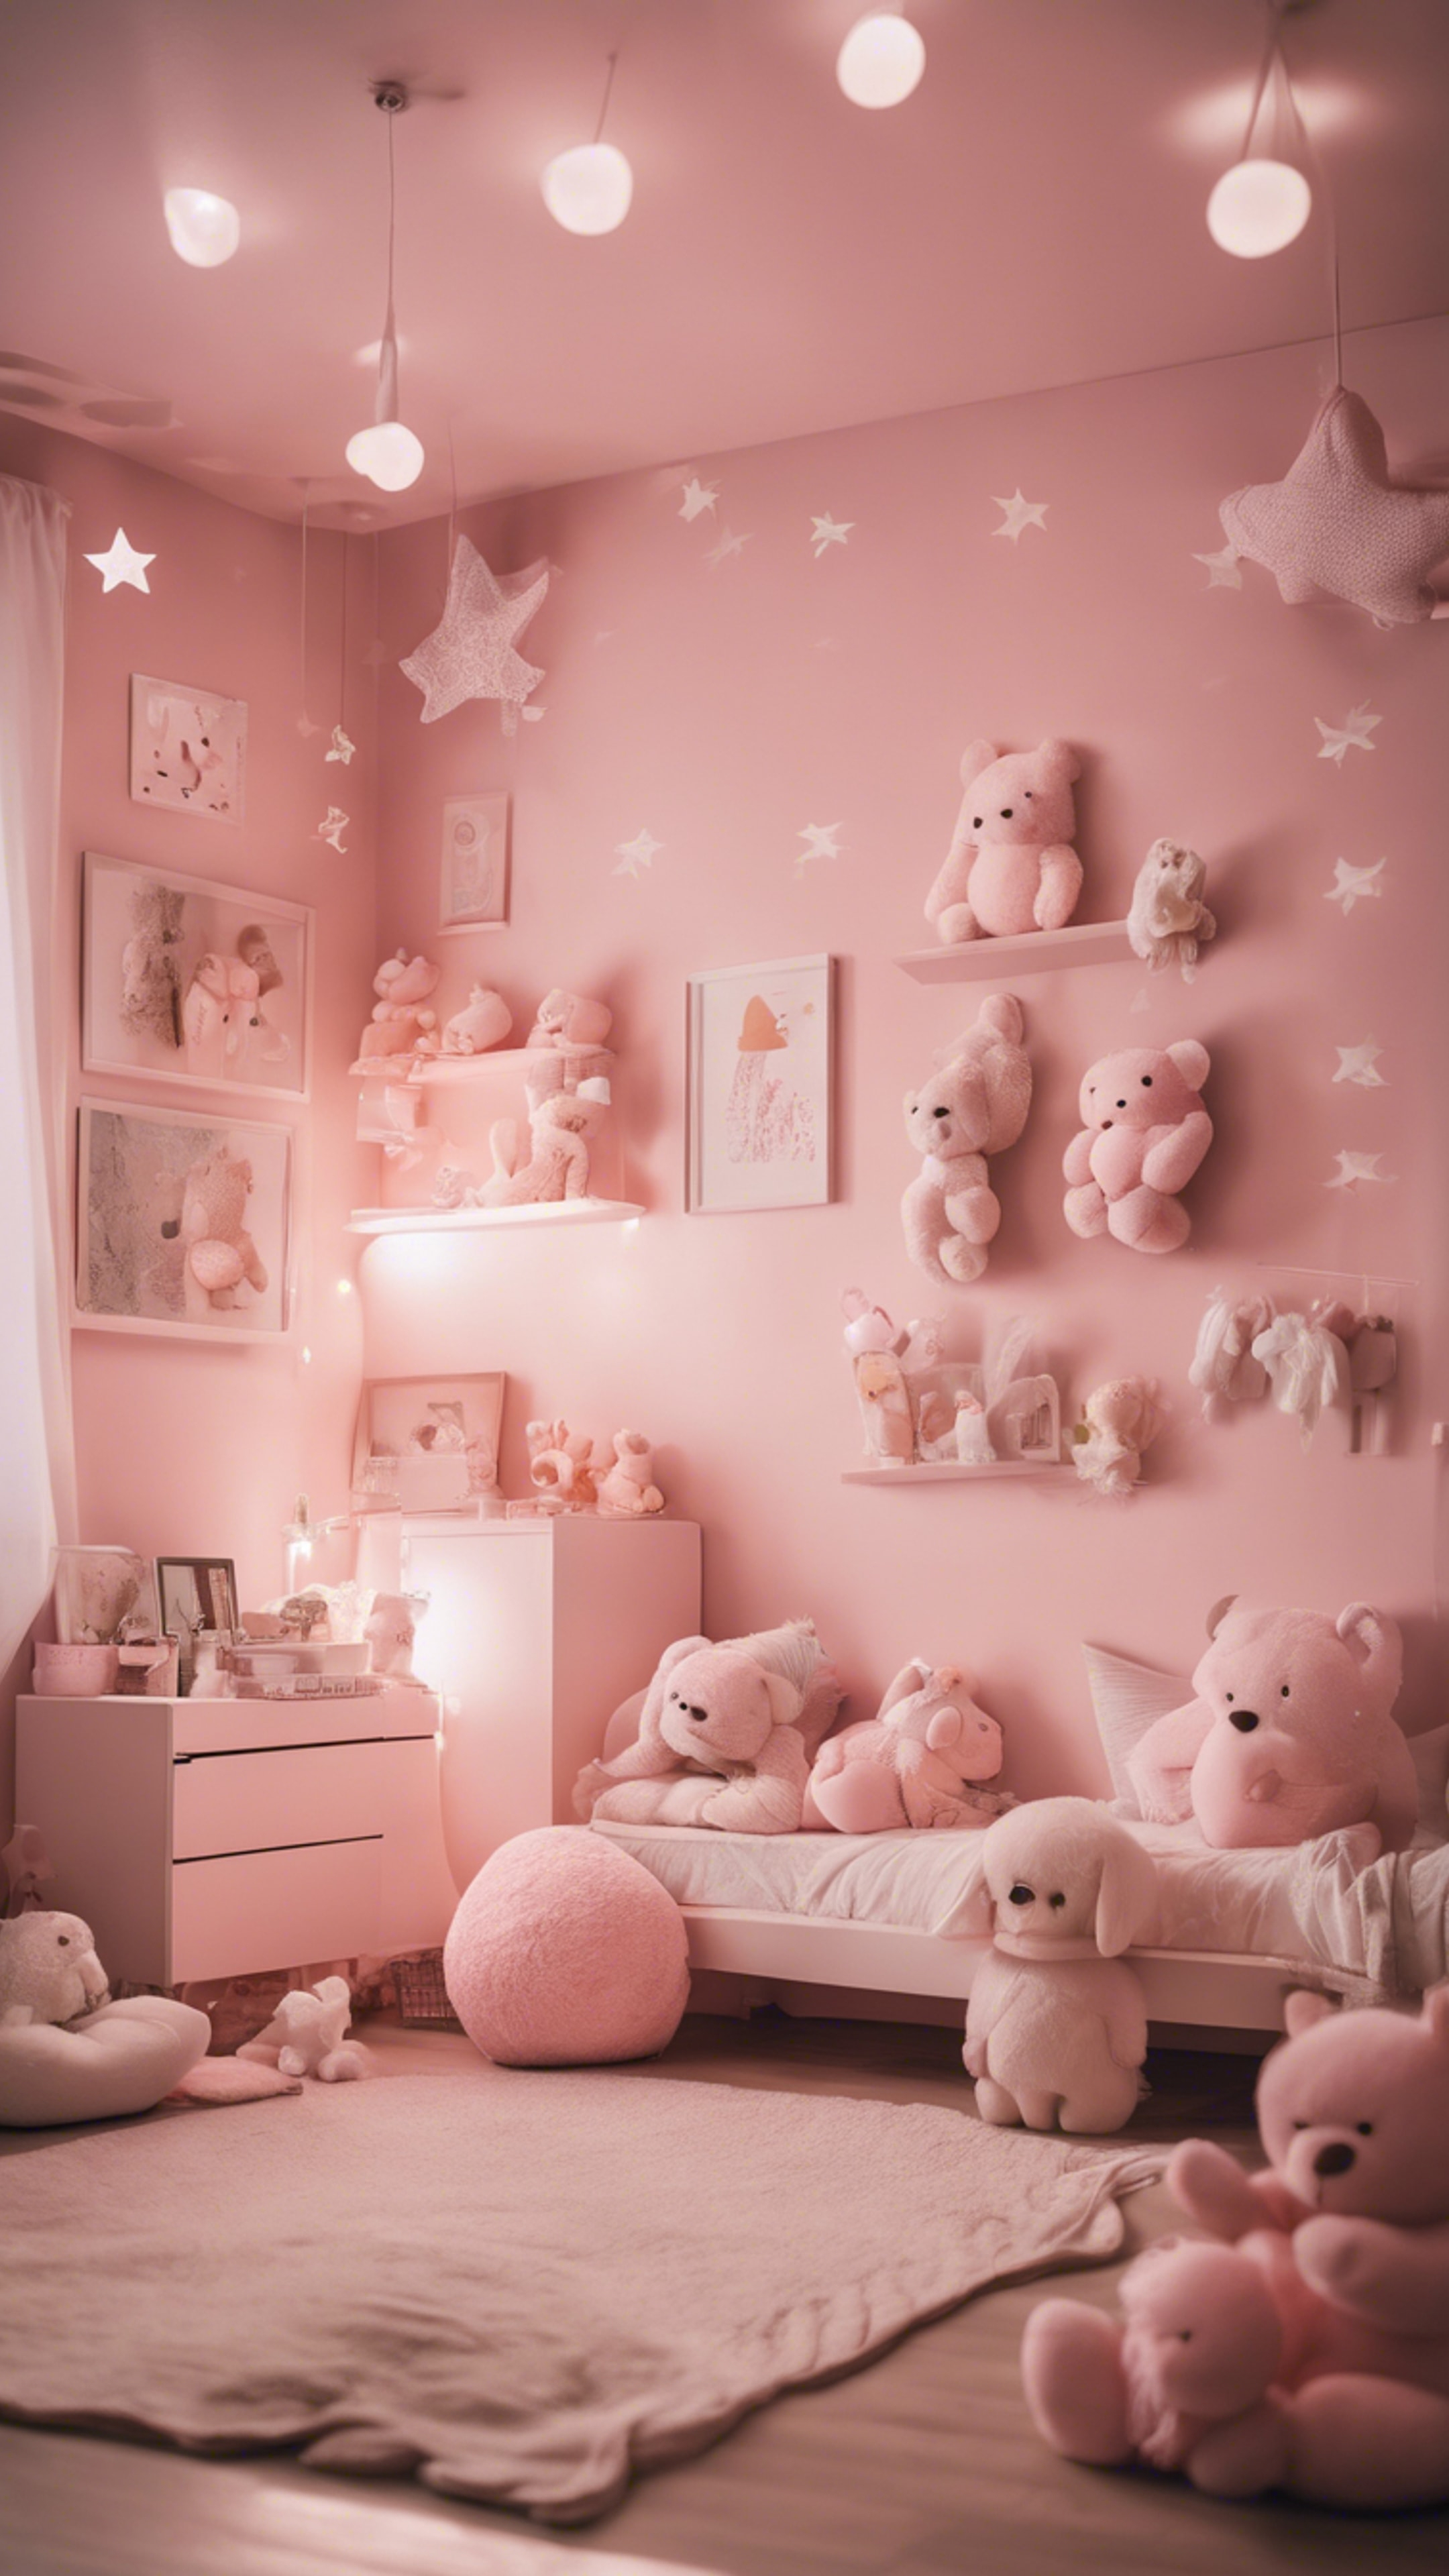 A child's bedroom designed in light pink Kawaii theme, with fluffy stuffed animals and stars. 墙纸[1c682dae9a5849159ddf]